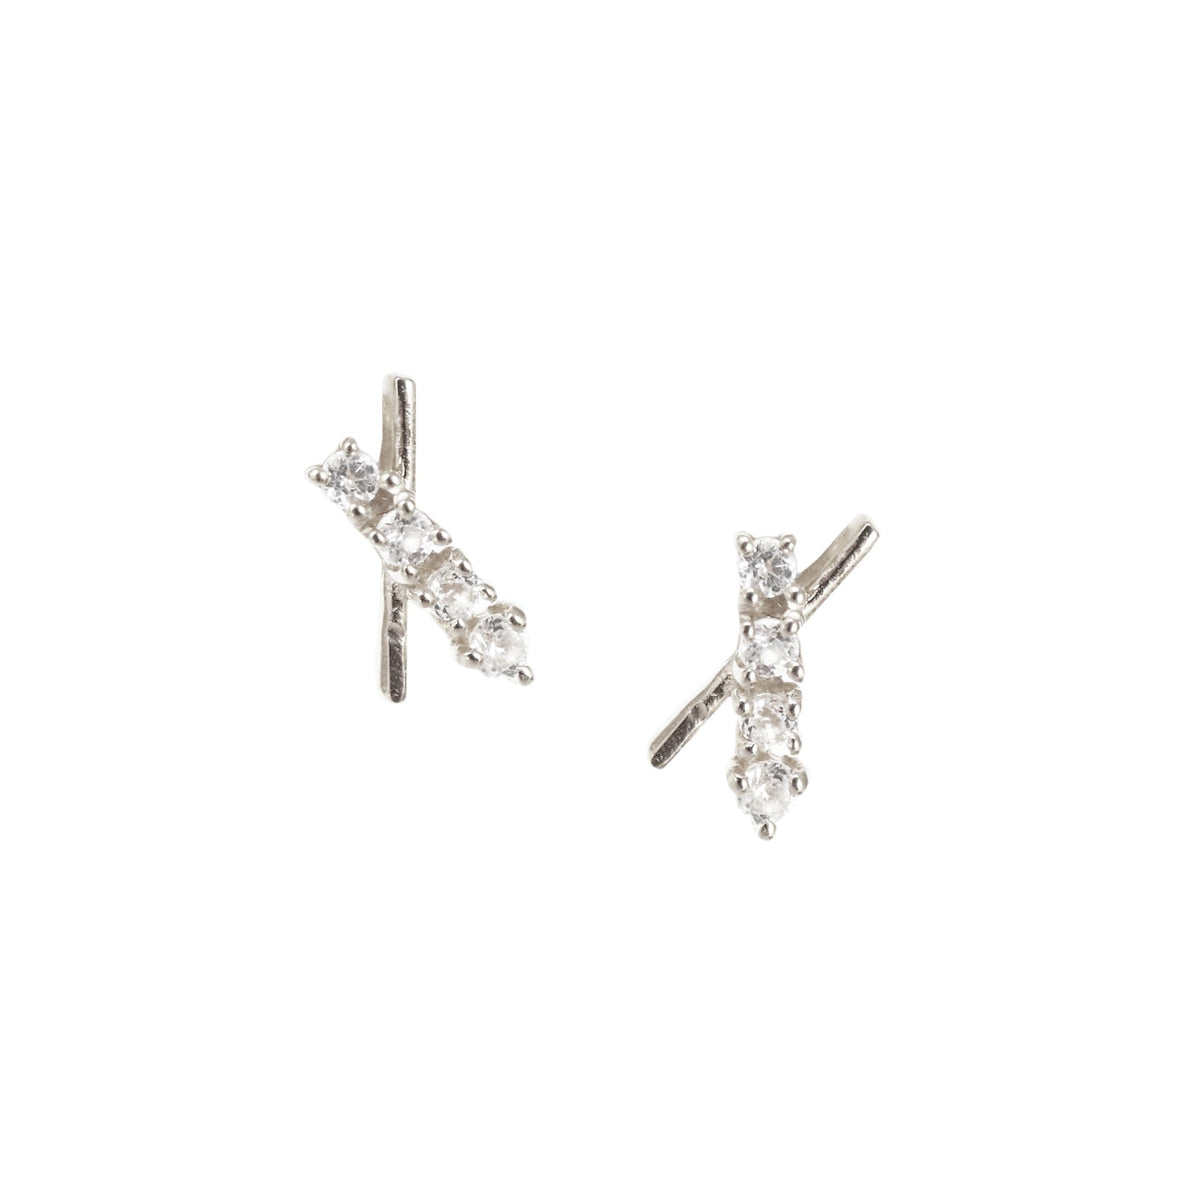 TINY DREAM STARDUST STUDS - CUBIC ZIRCONIA &amp; SILVER - SO PRETTY CARA COTTER